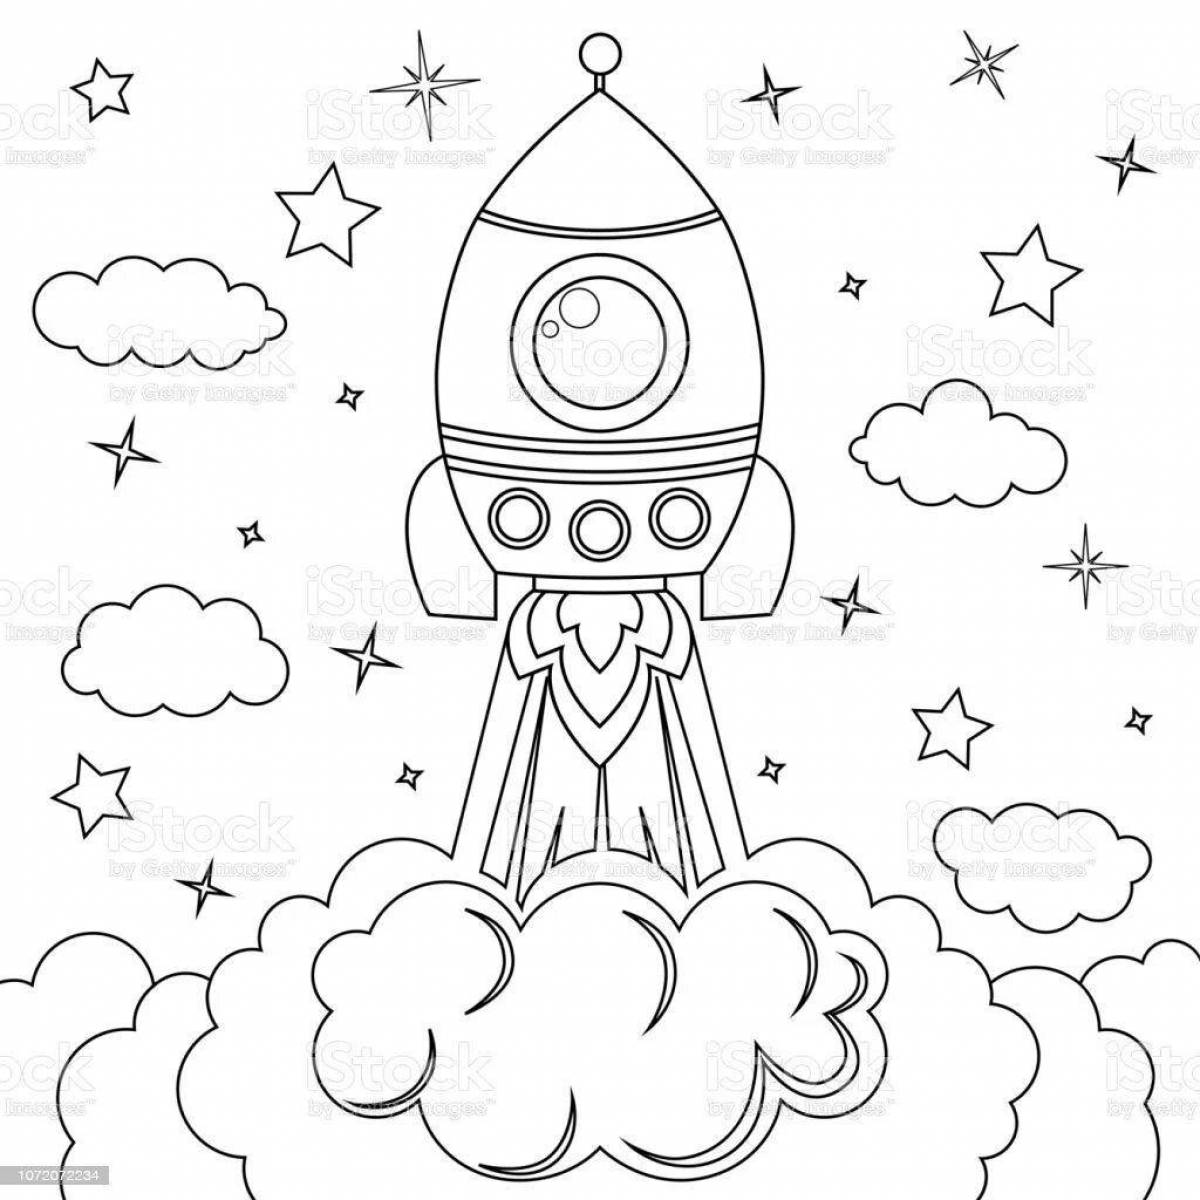 Majestic space rocket coloring page